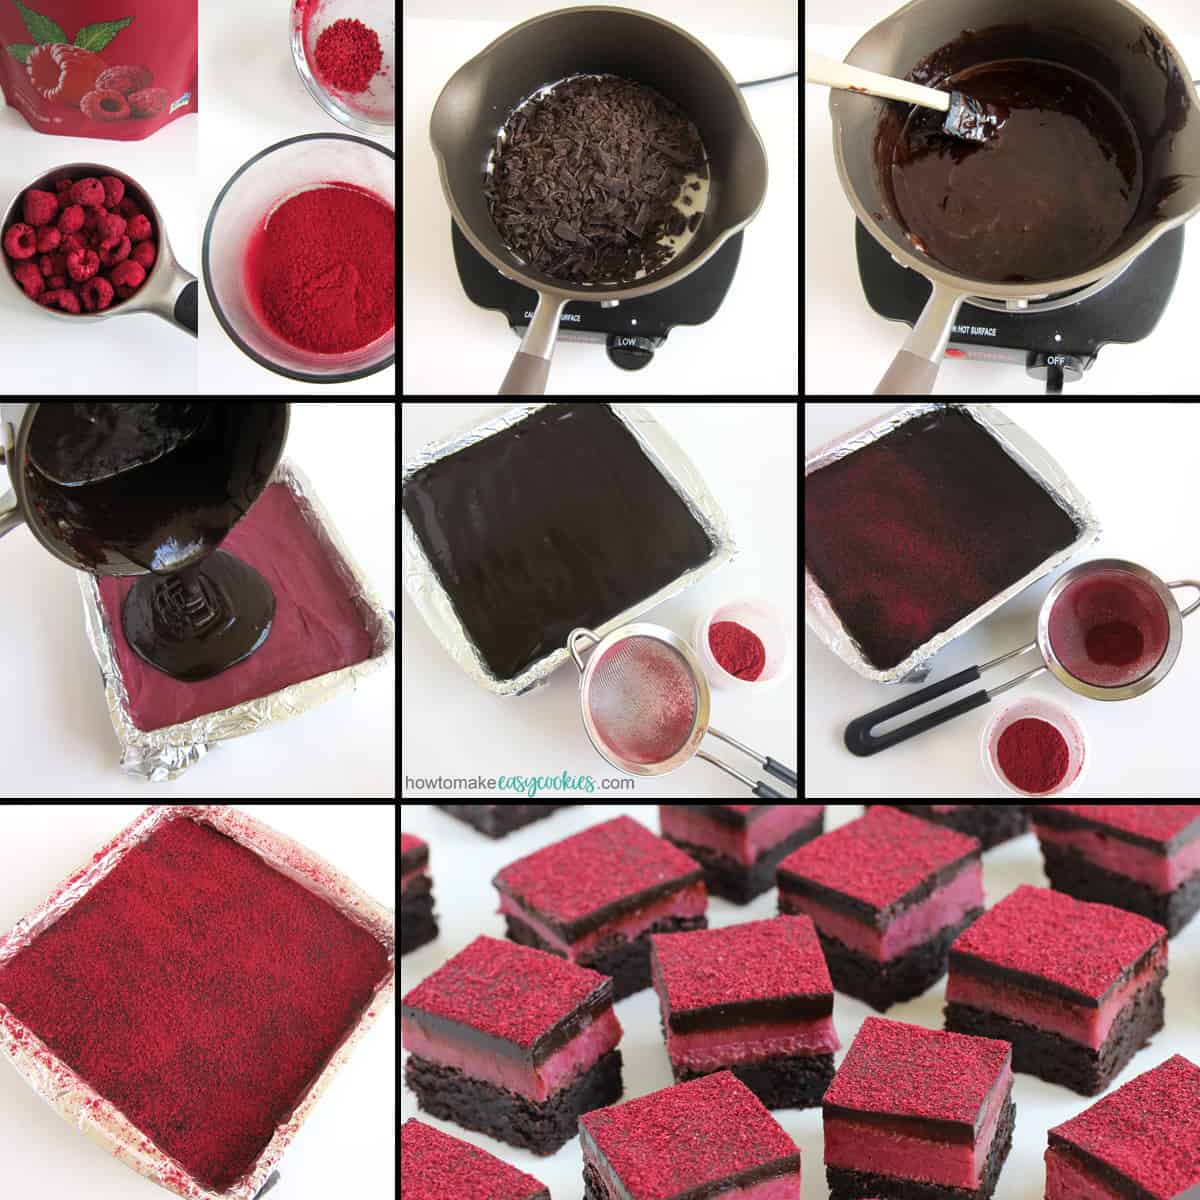 make semi-sweet chocolate ganache and pour it over the chocolate raspberry cookie bar then sprinkle on freeze-dried raspberry powder